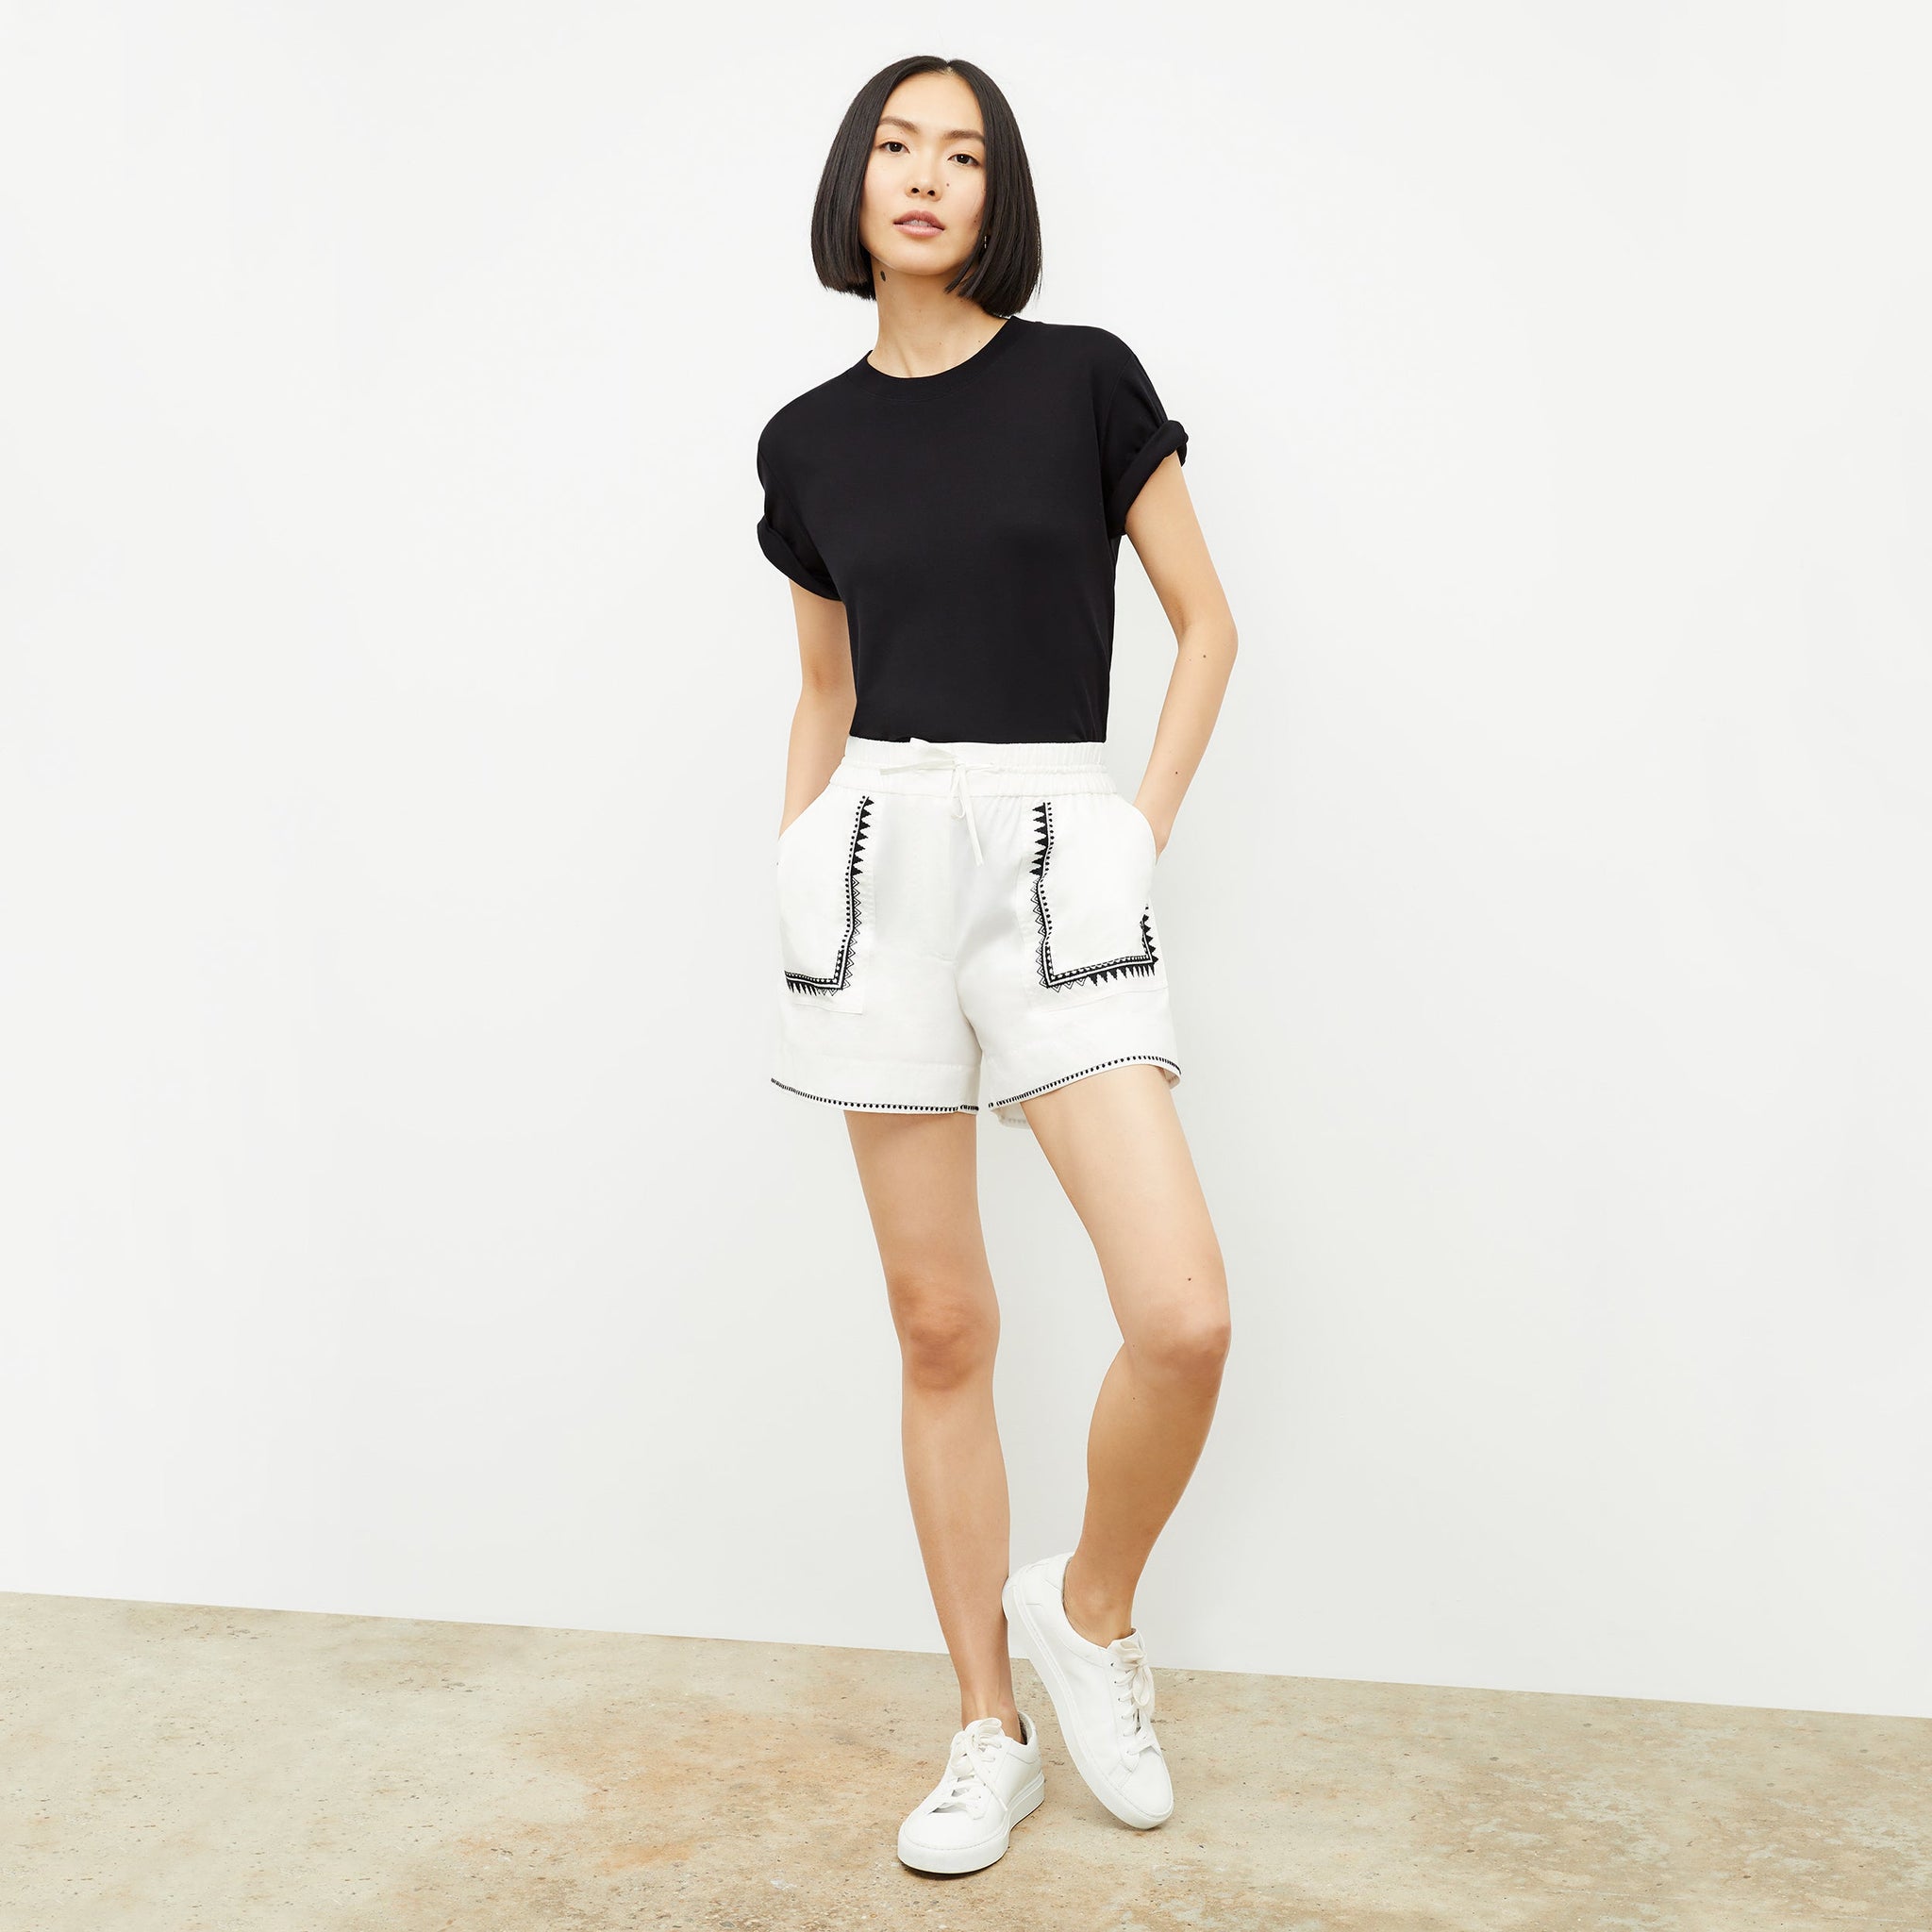 Front image of a woman standing wearing the leslie top in compact cotton in black